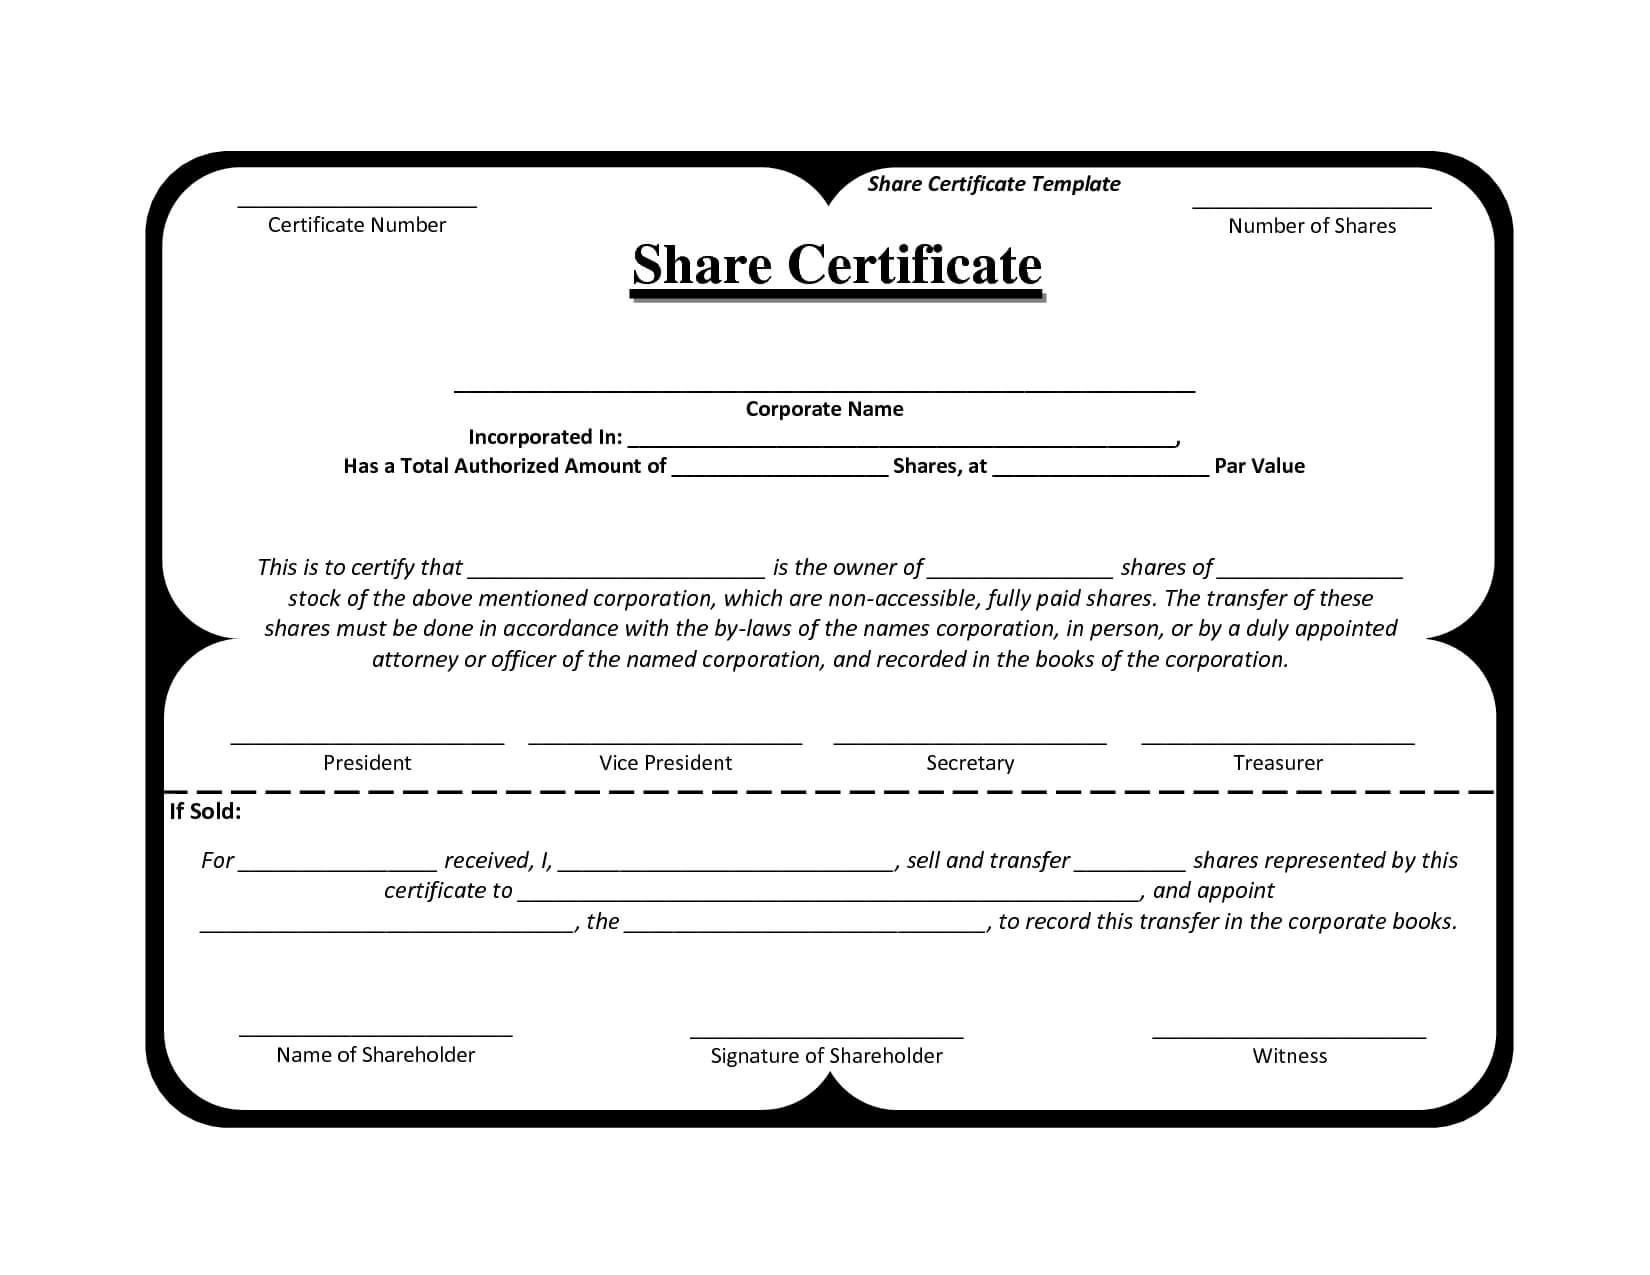 Template Share Certificate Rbscqi9V | Certificate Templates Inside South African Birth Certificate Template